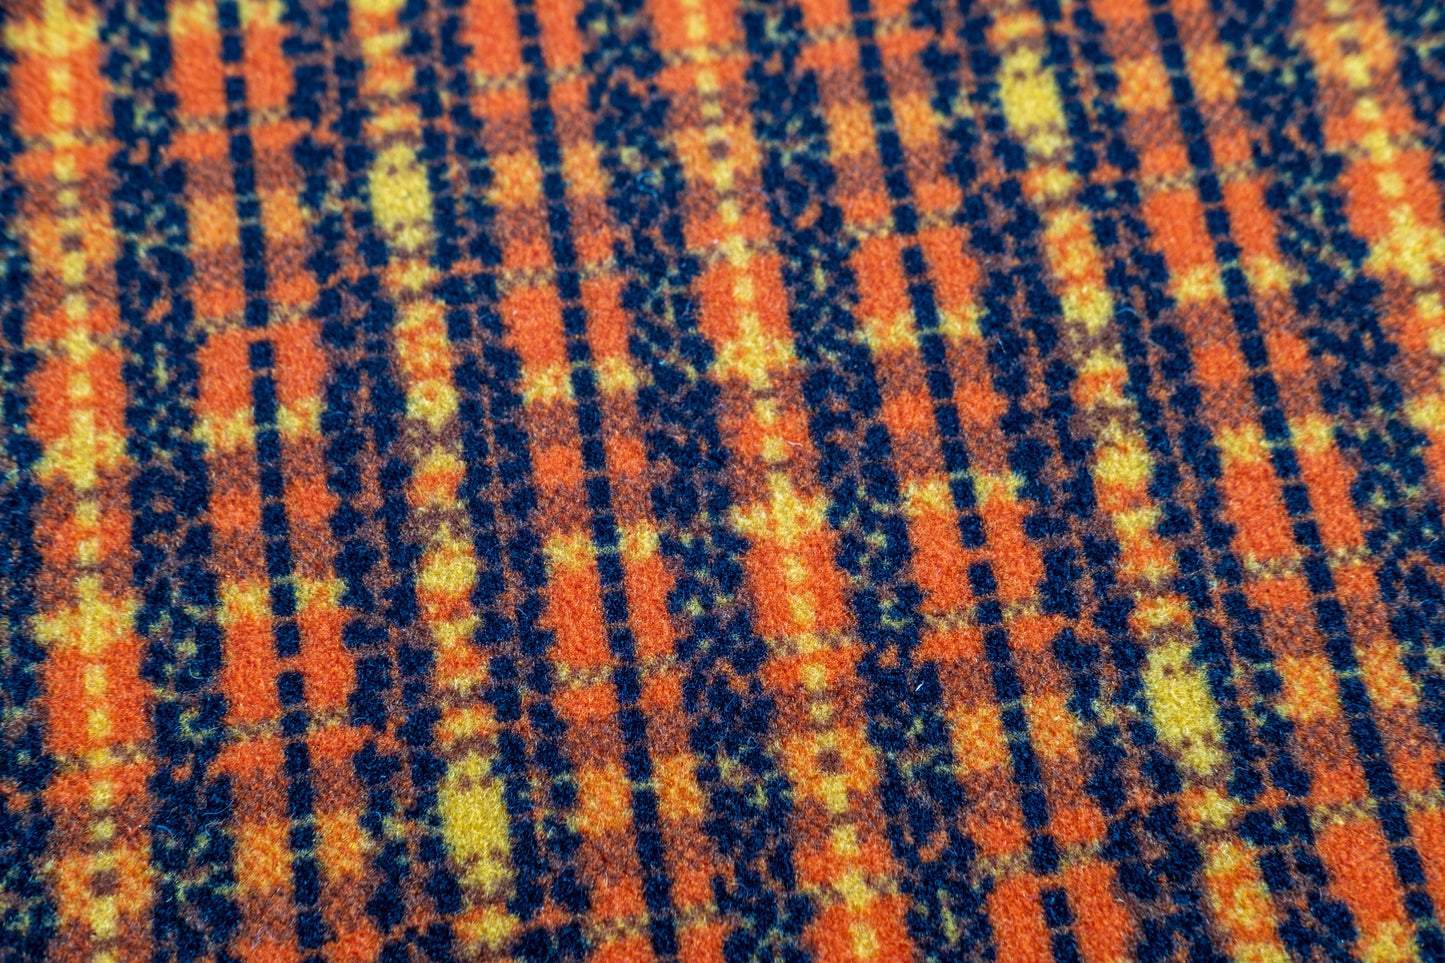 Castle / Autumn Gold Tartan 1980s Bus and Coach Moquette Fabric Sold by the Metre